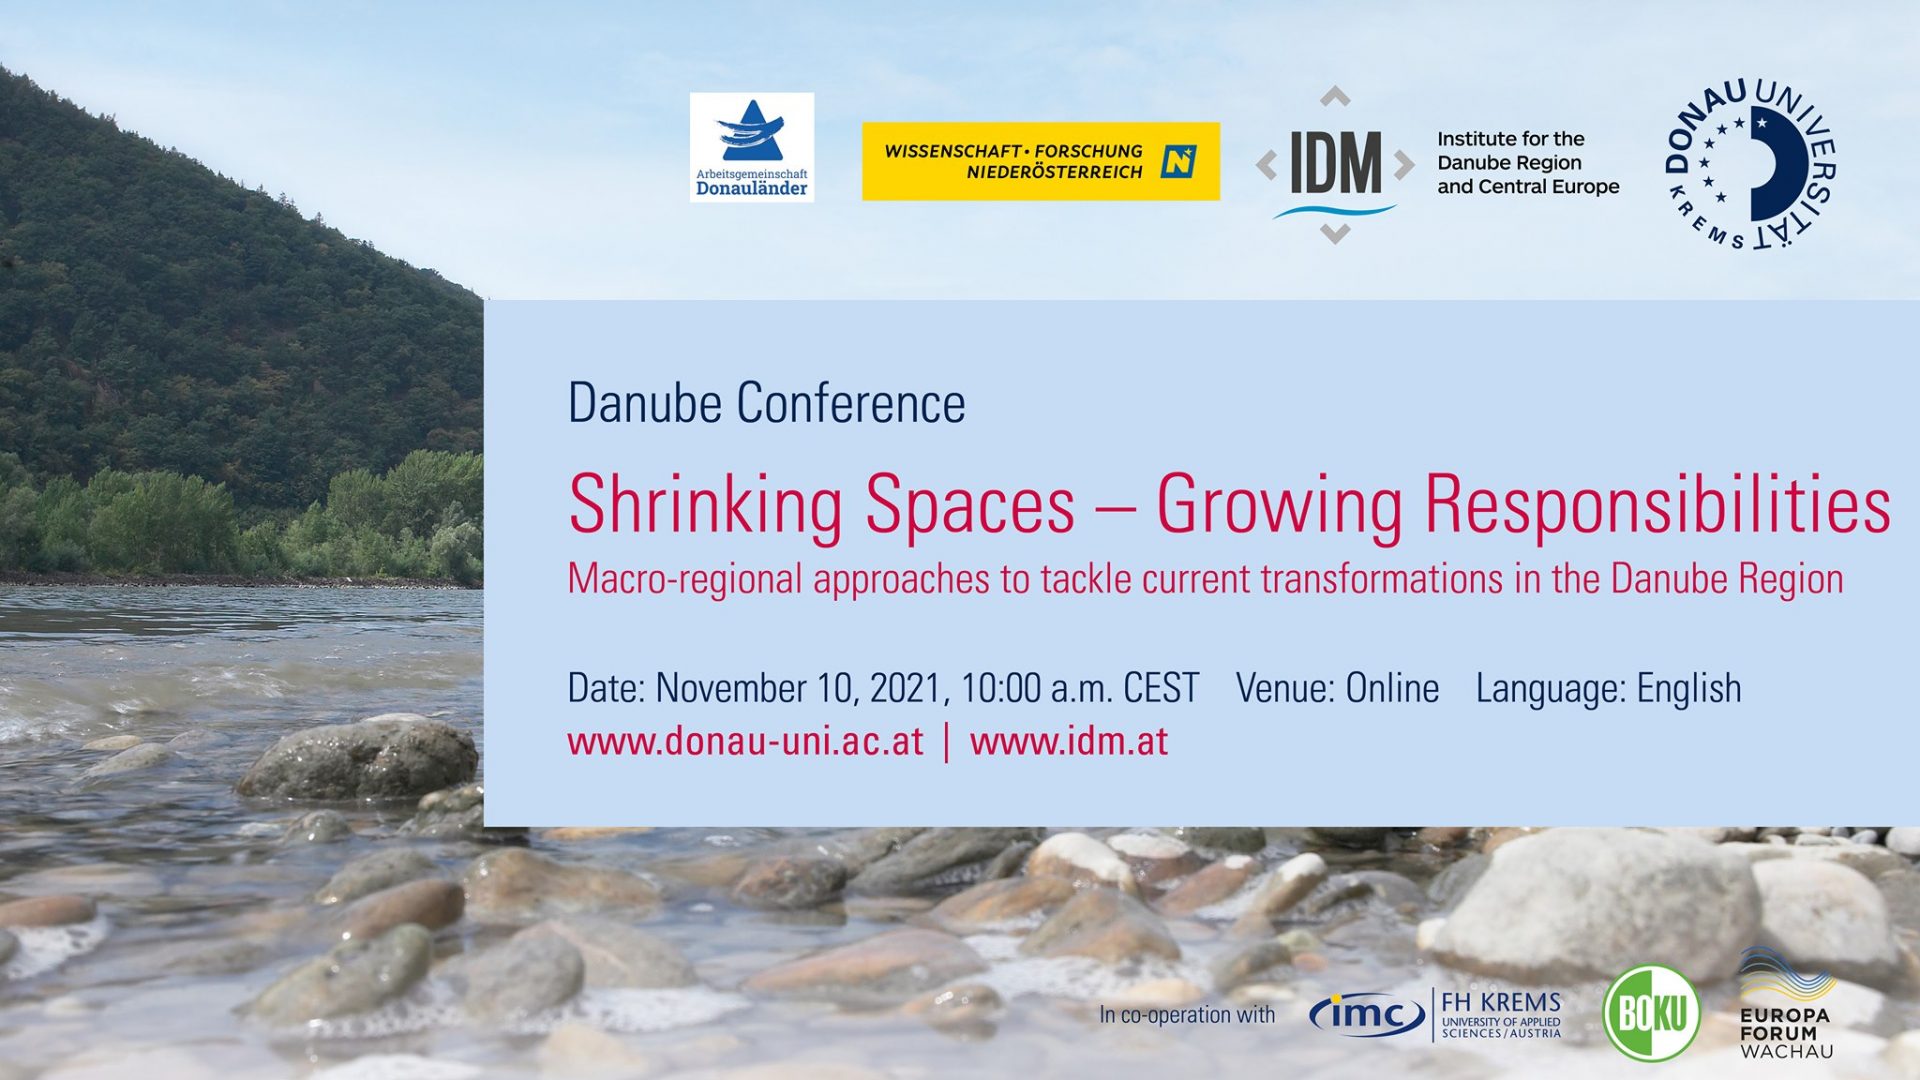 Danube Conference 2021 "Shrinking Spaces – Growing Responsibilities"